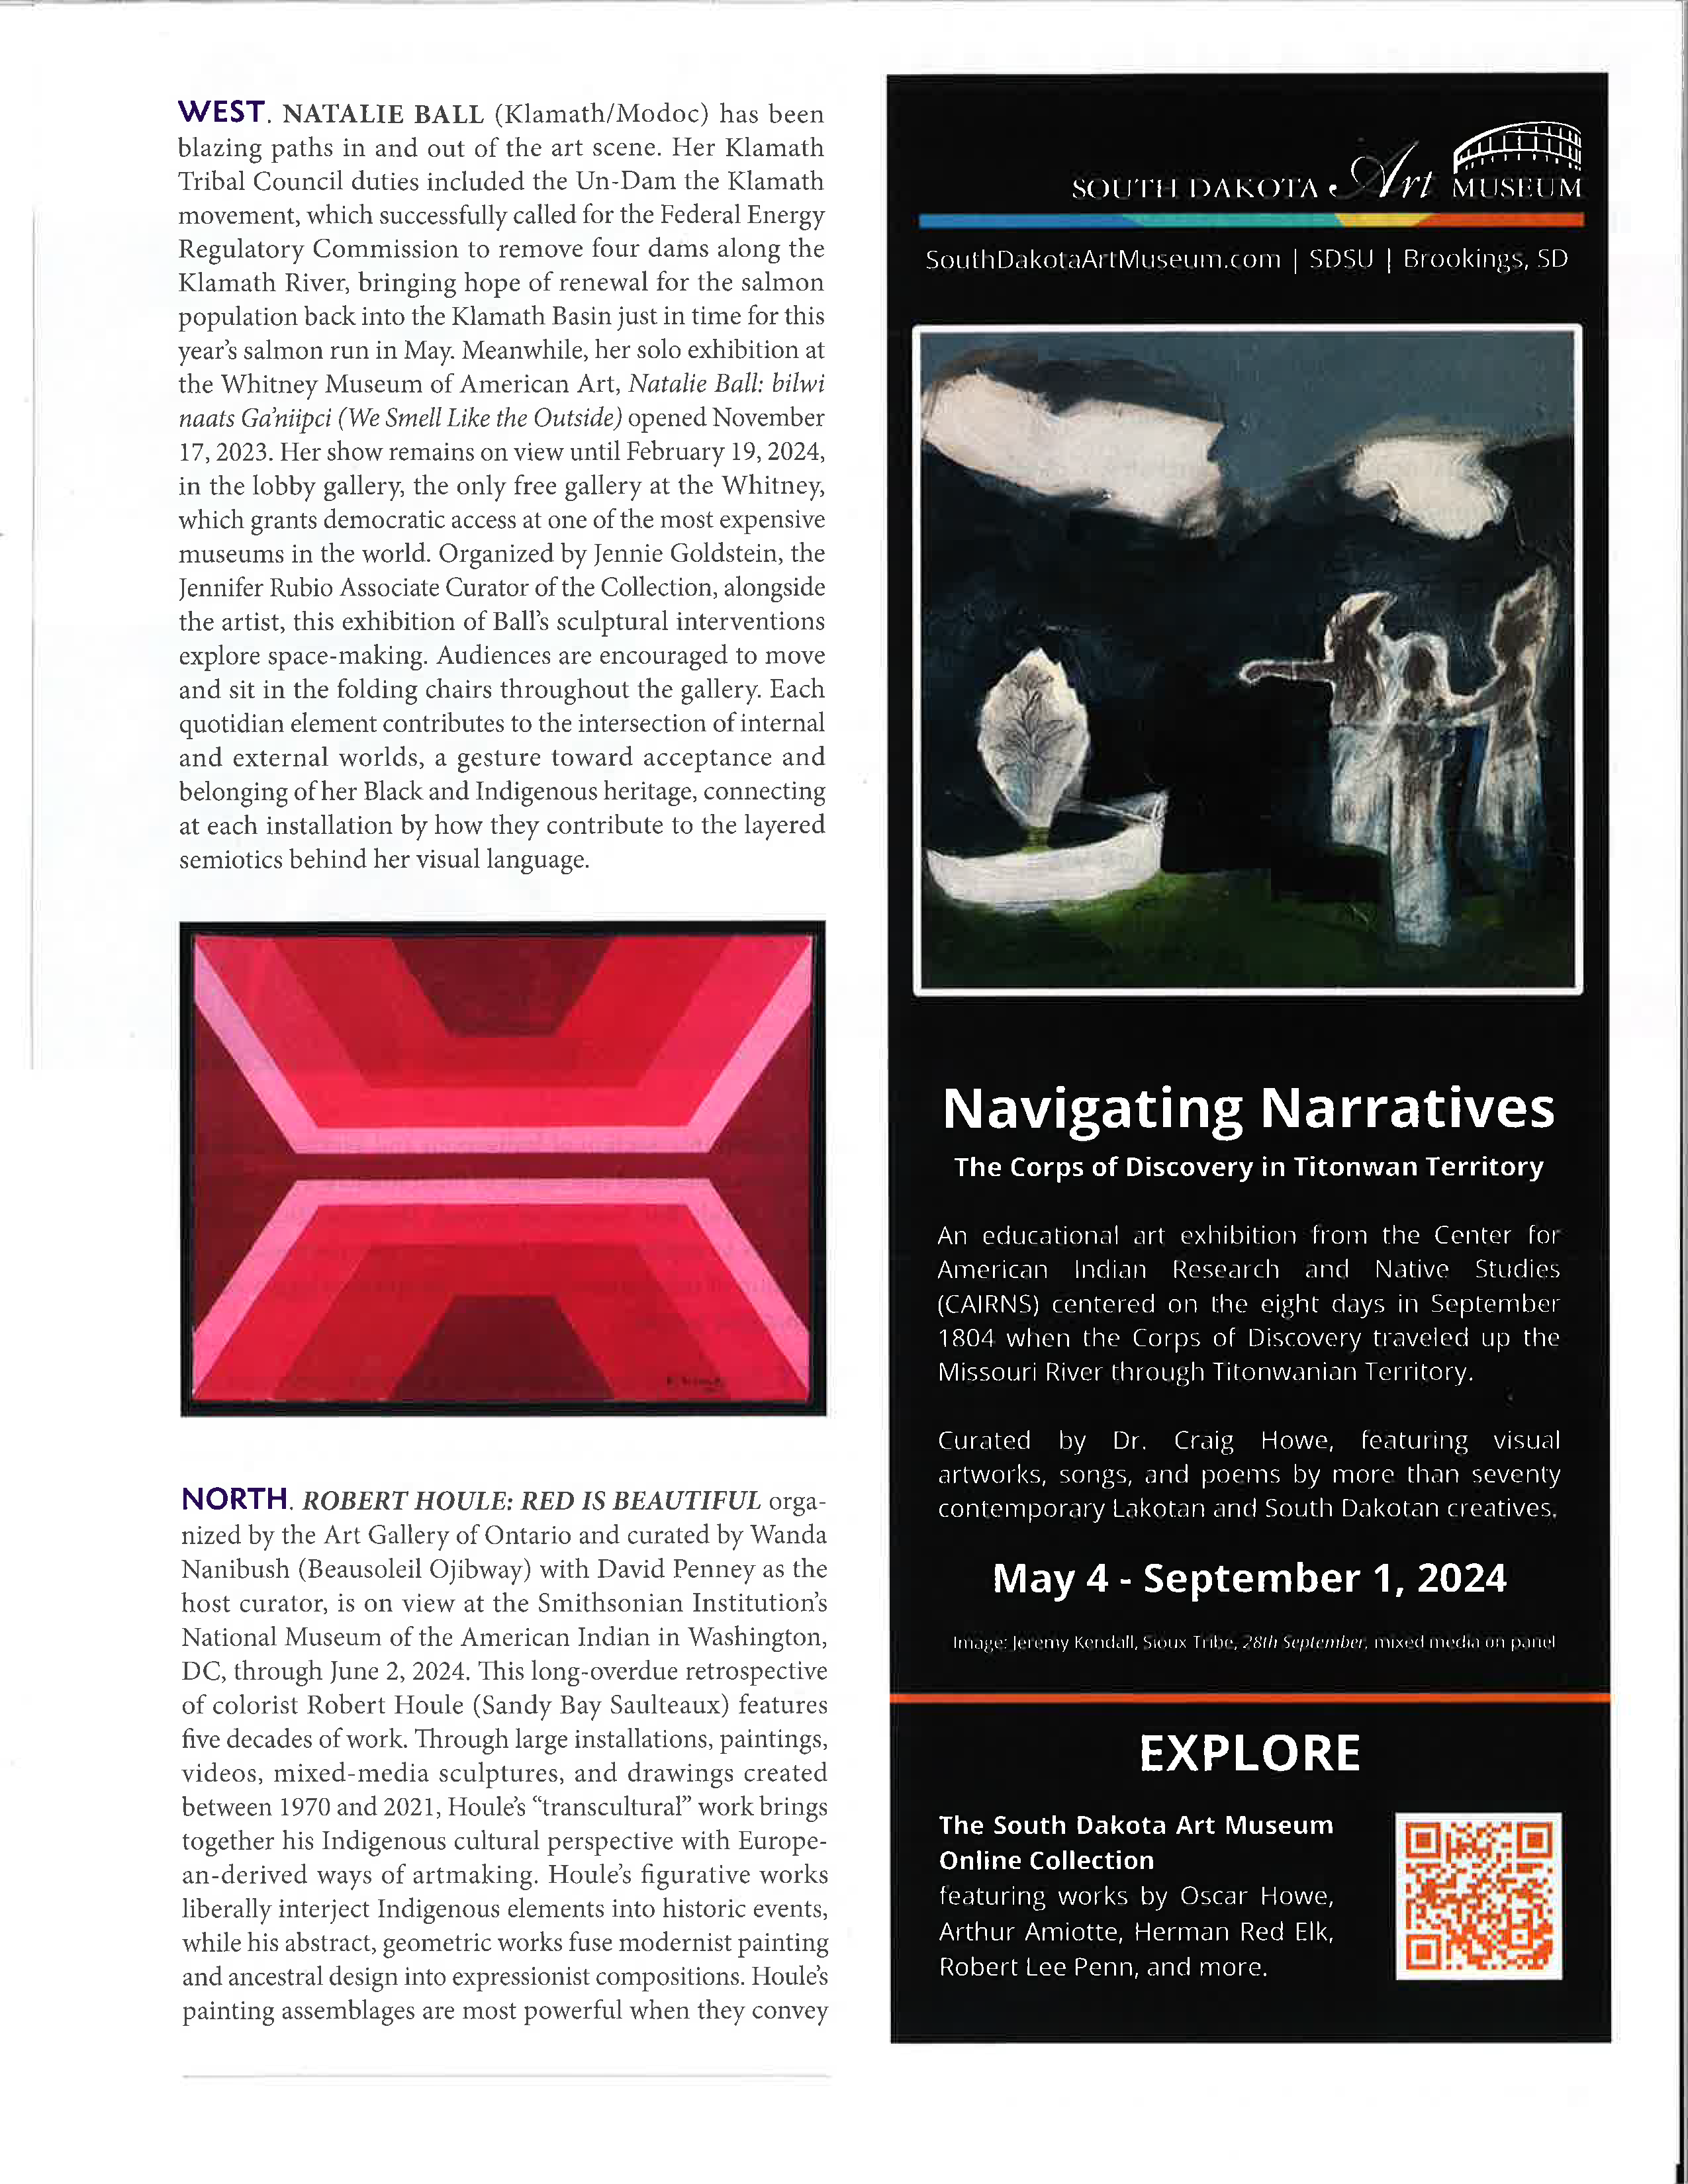 A magazine article with a geometric red and pink image